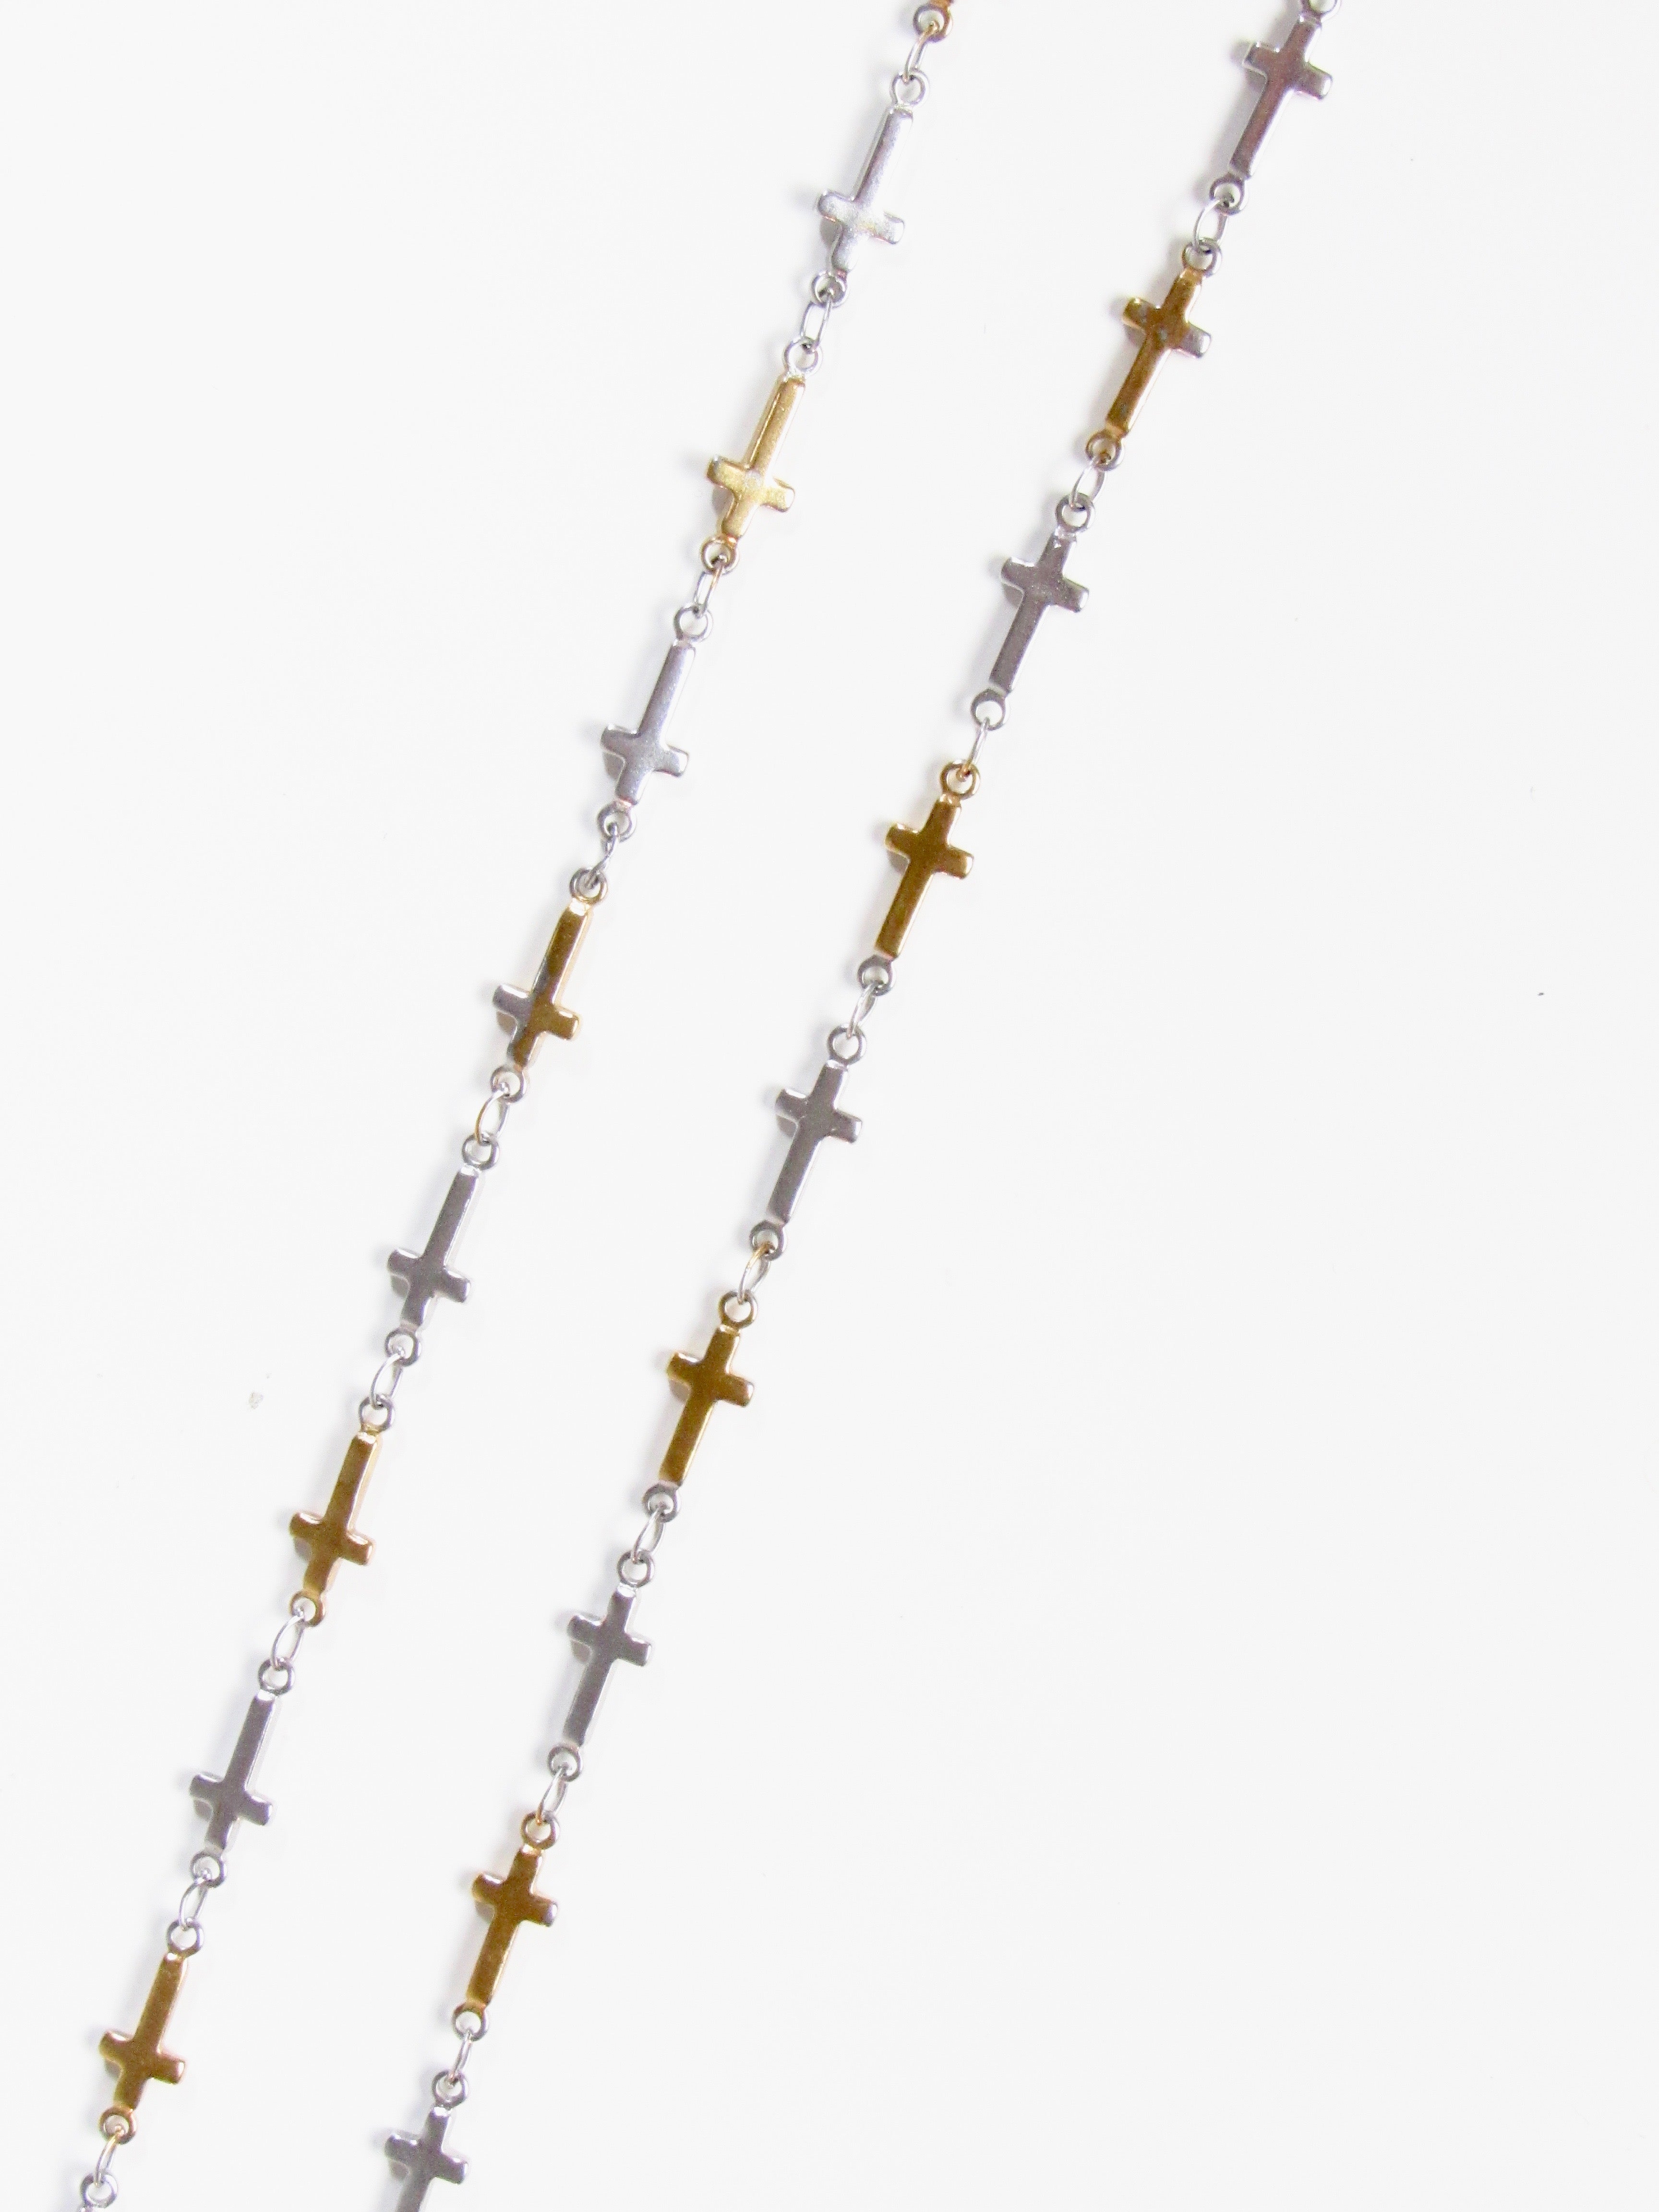 Tattoo Cross Alternated Gold & Silver Chain Necklace